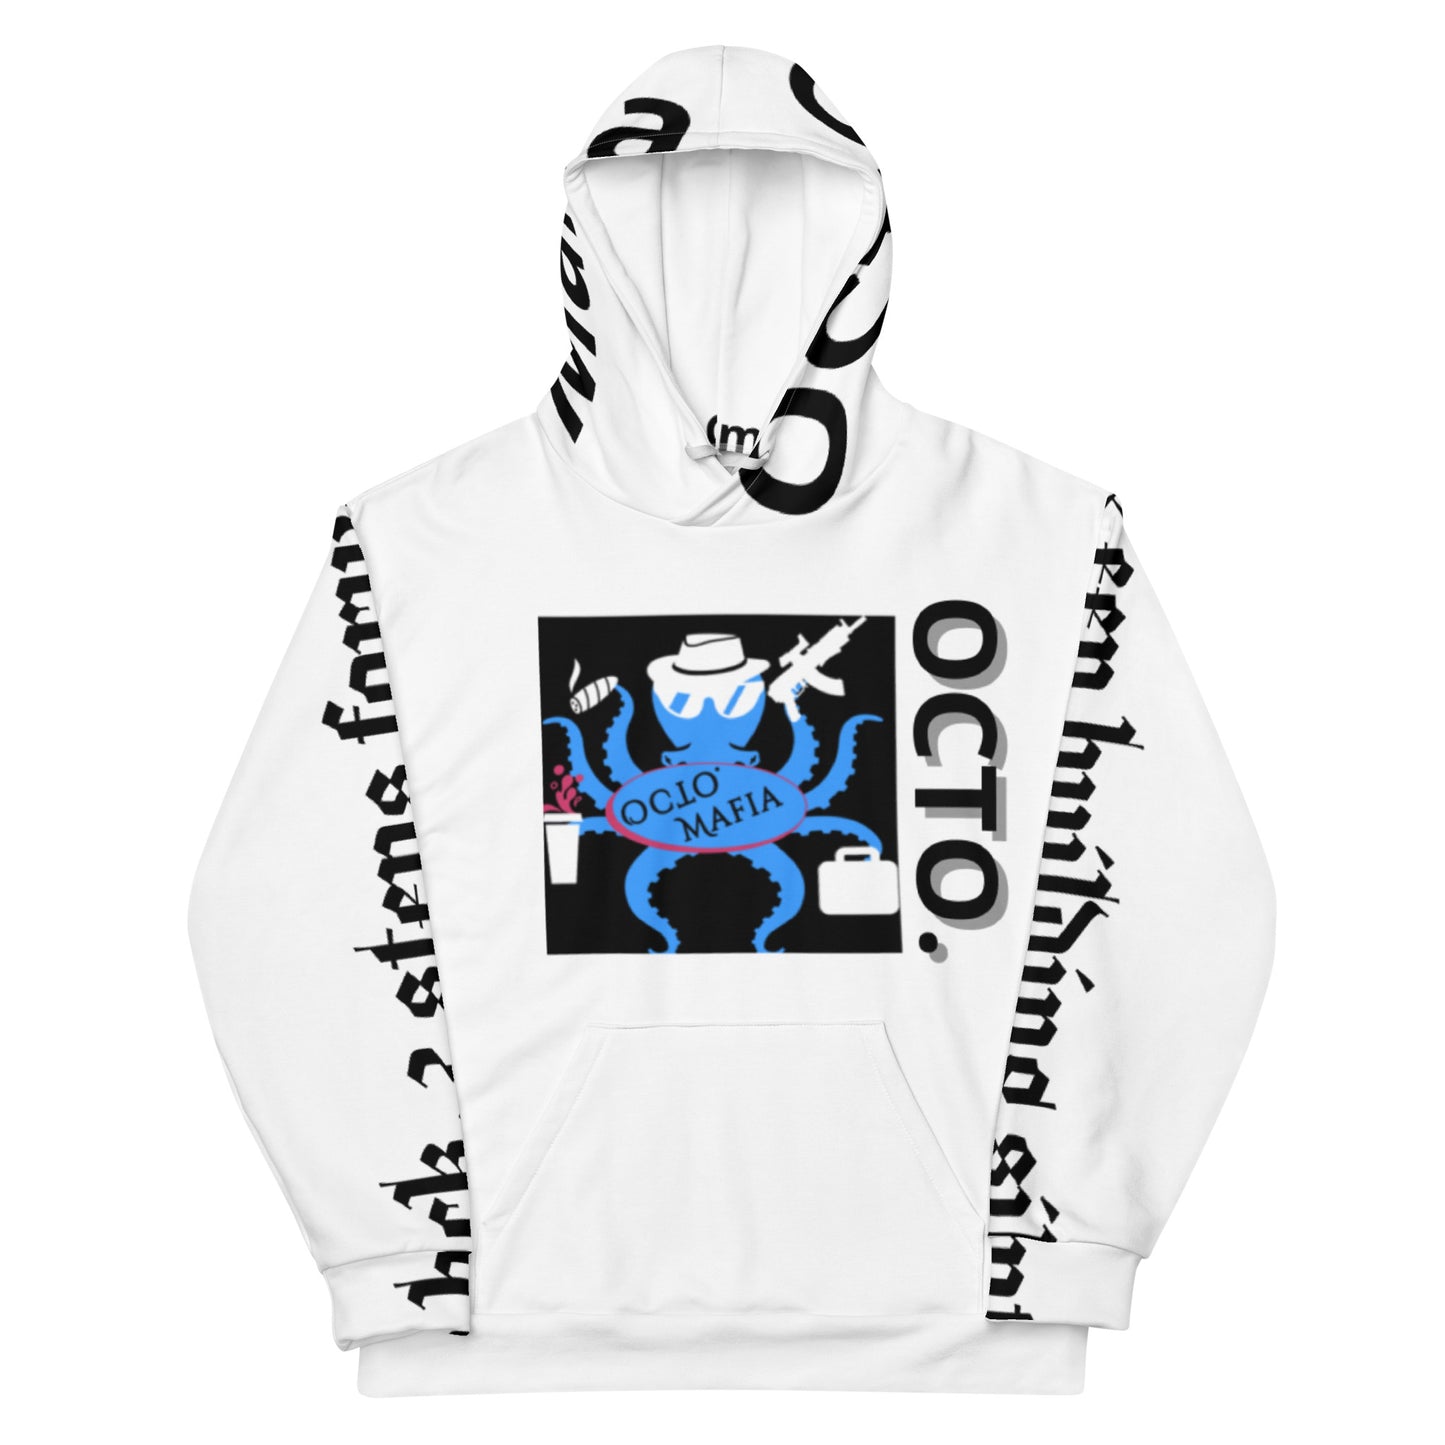 Octo. Mafia "endless" hoodie (trapsuit top)